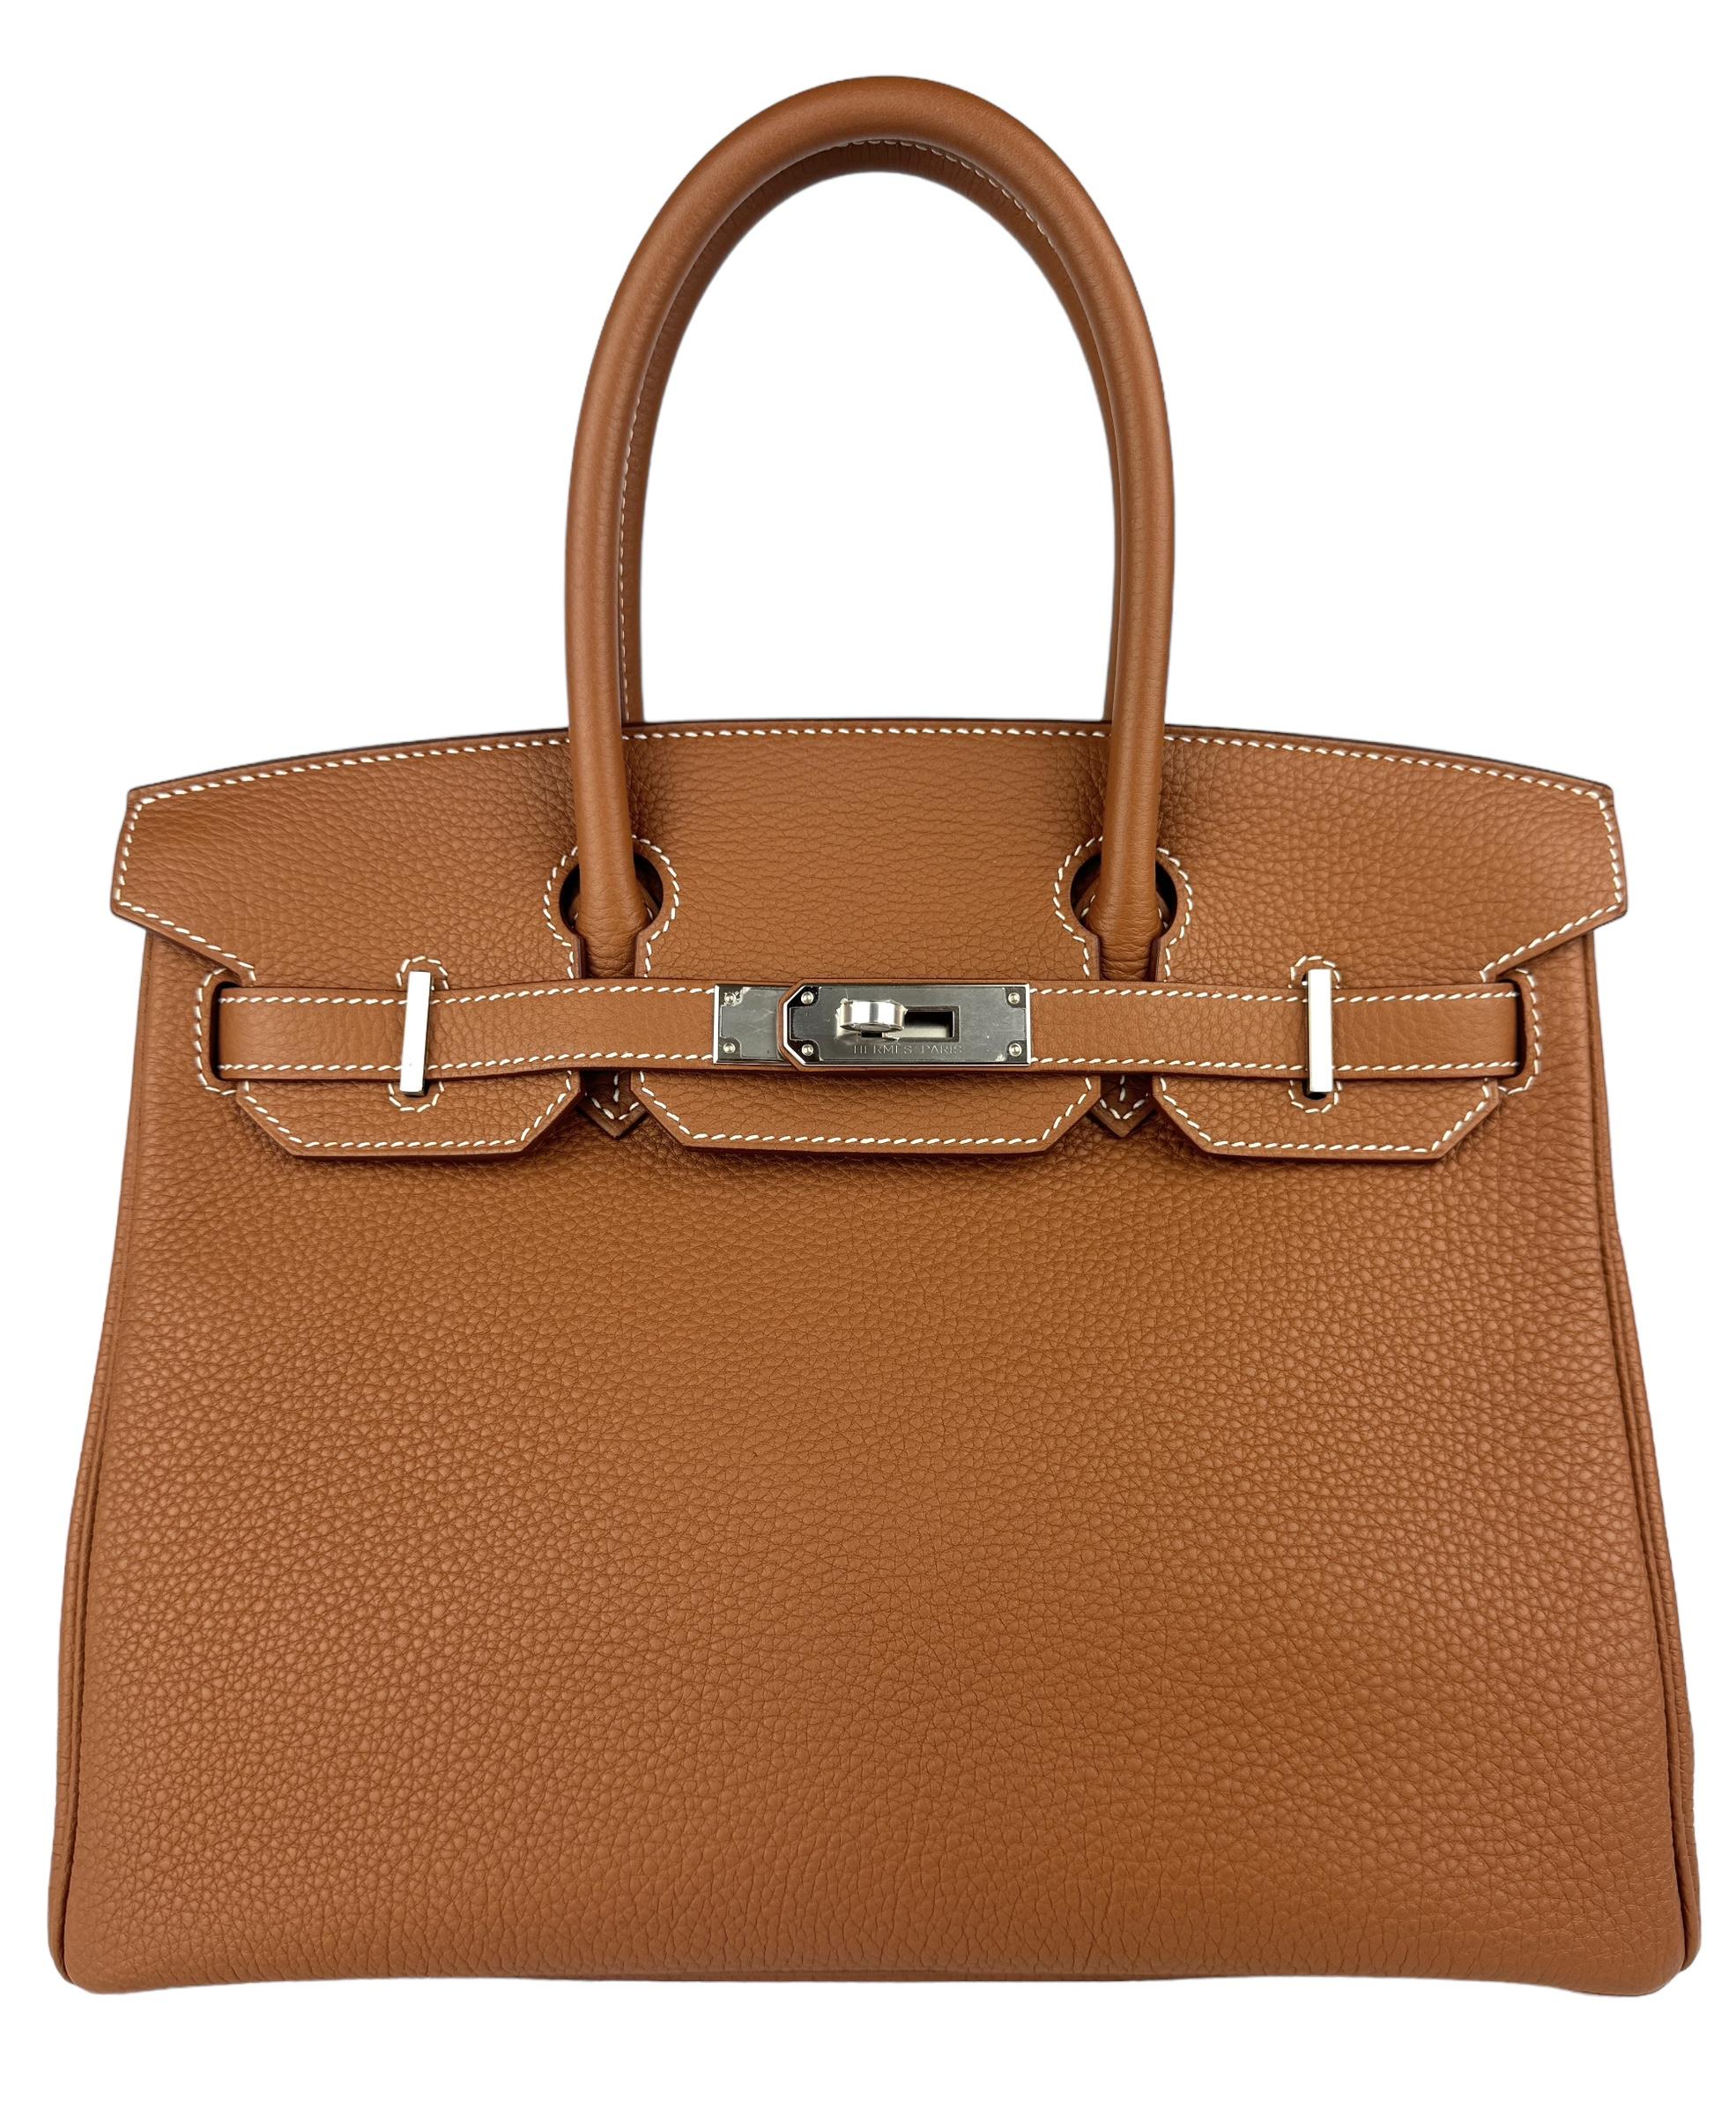 Absolutely Stunning Most Coveted Hermes Birkin 30 Gold Togo Leather complimented by Palladium Hardware. Pristine almost Like New 2021 Z Stamp. Plastic on All Hardware! 

Shop with Confidence from Lux Addicts. Authenticity Guaranteed! 

Please keep